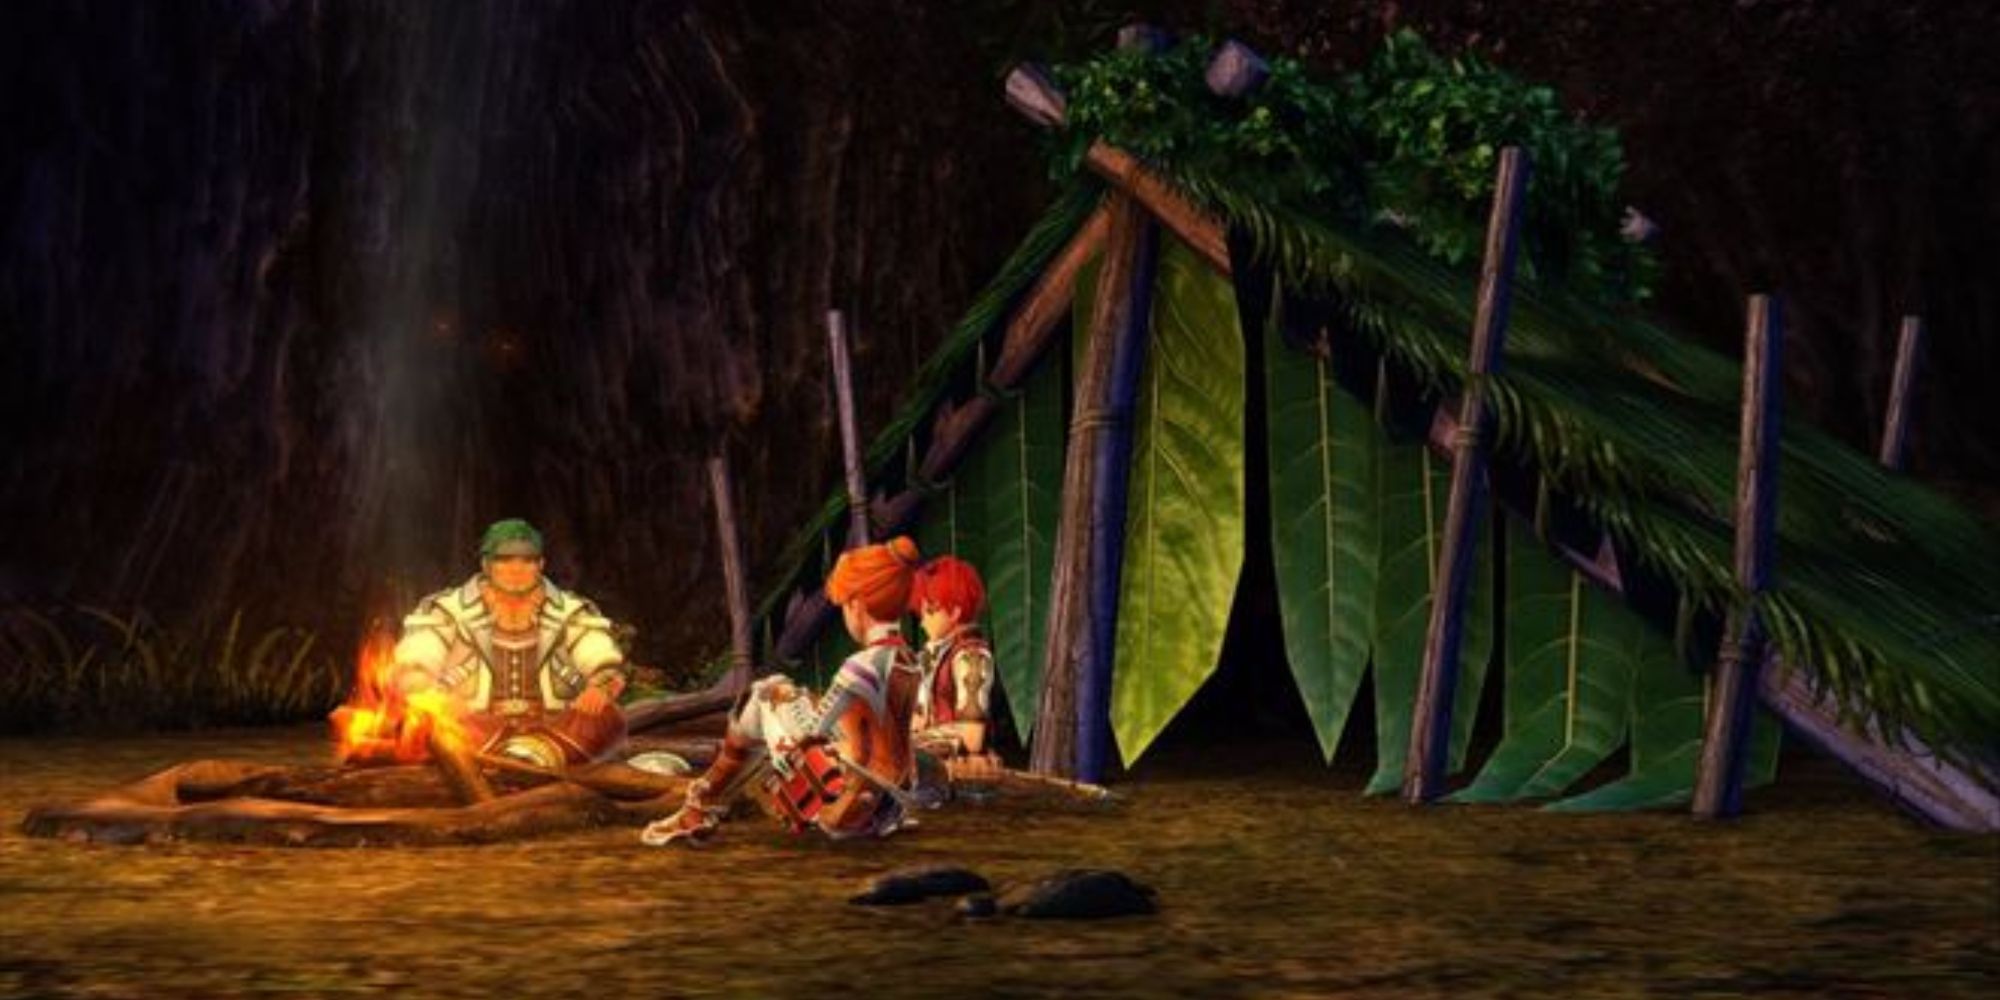 Adol, Laxia, and Sahad setting up camp in Ys 8: Lacrimosa of Dana